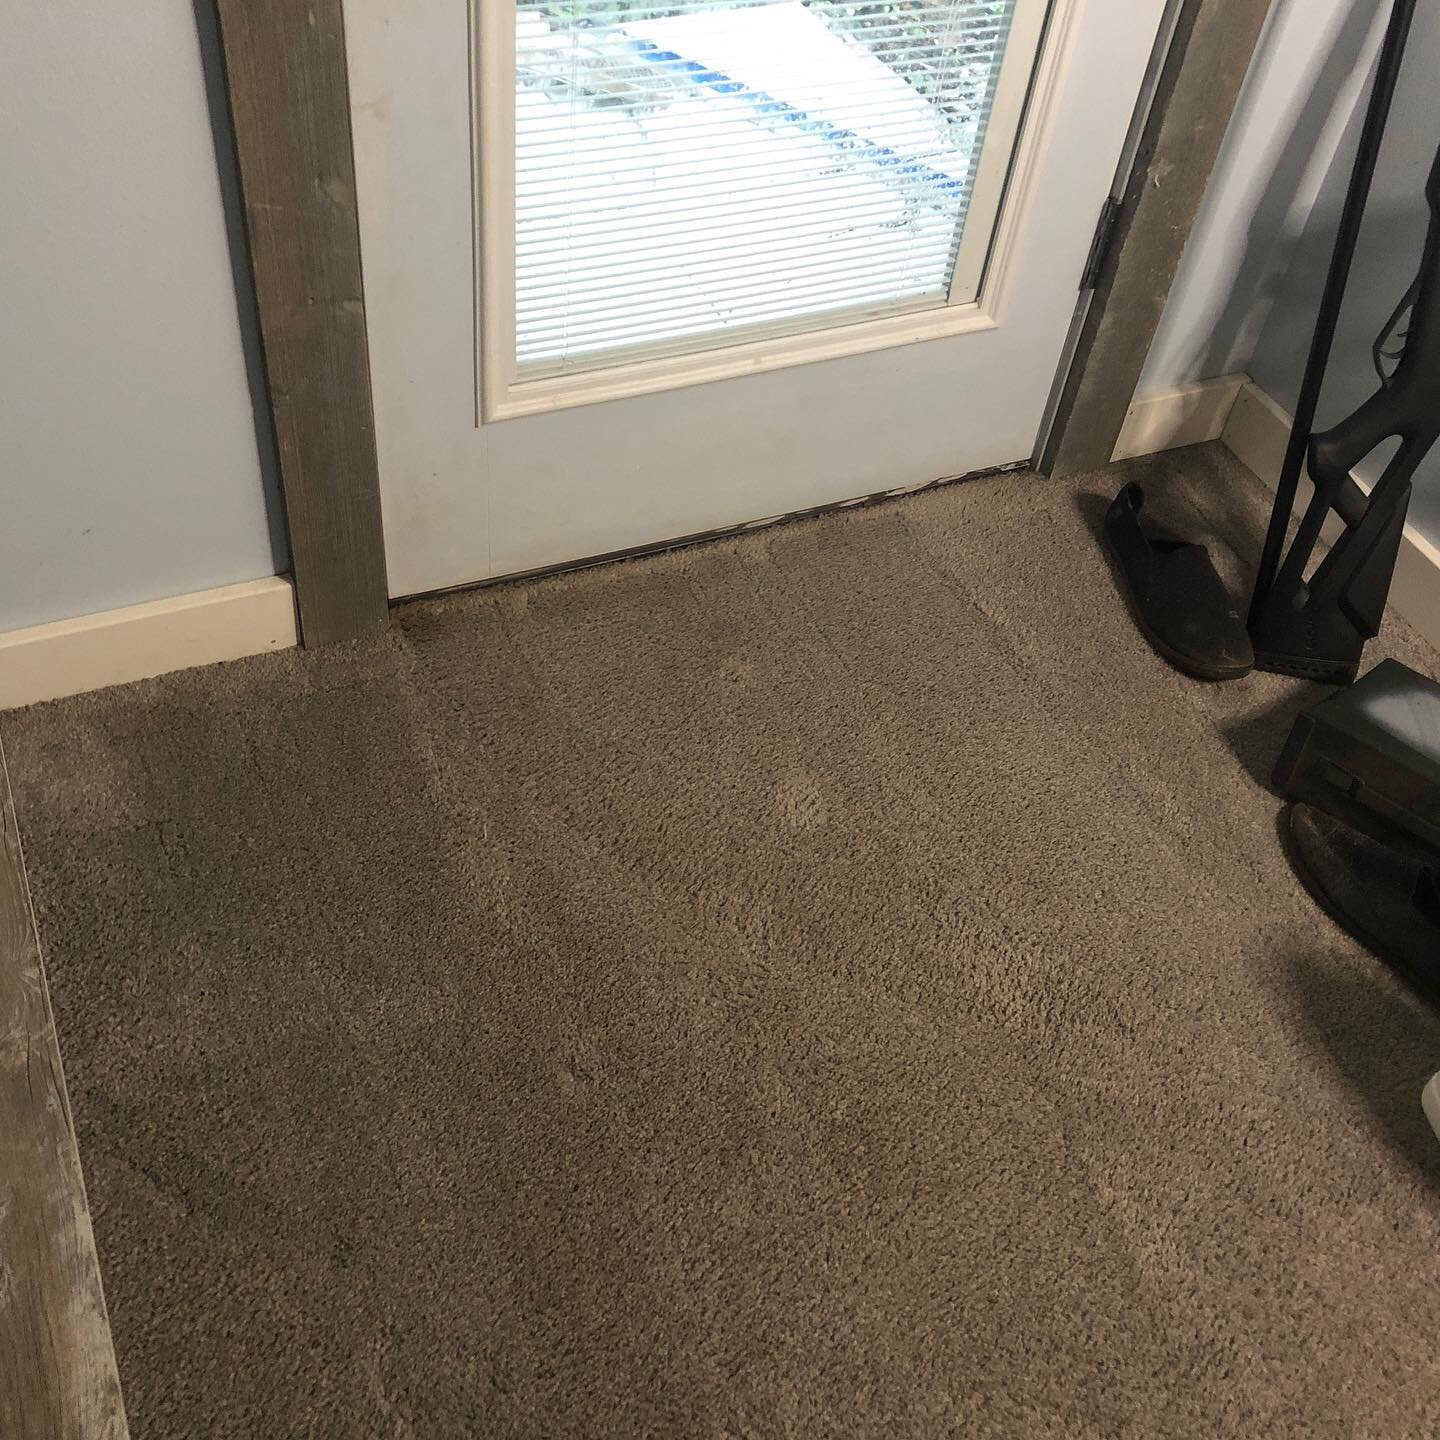 Tired of pets making your back door carpet dirty? Contact us today to get your easy to clean tile installed today!